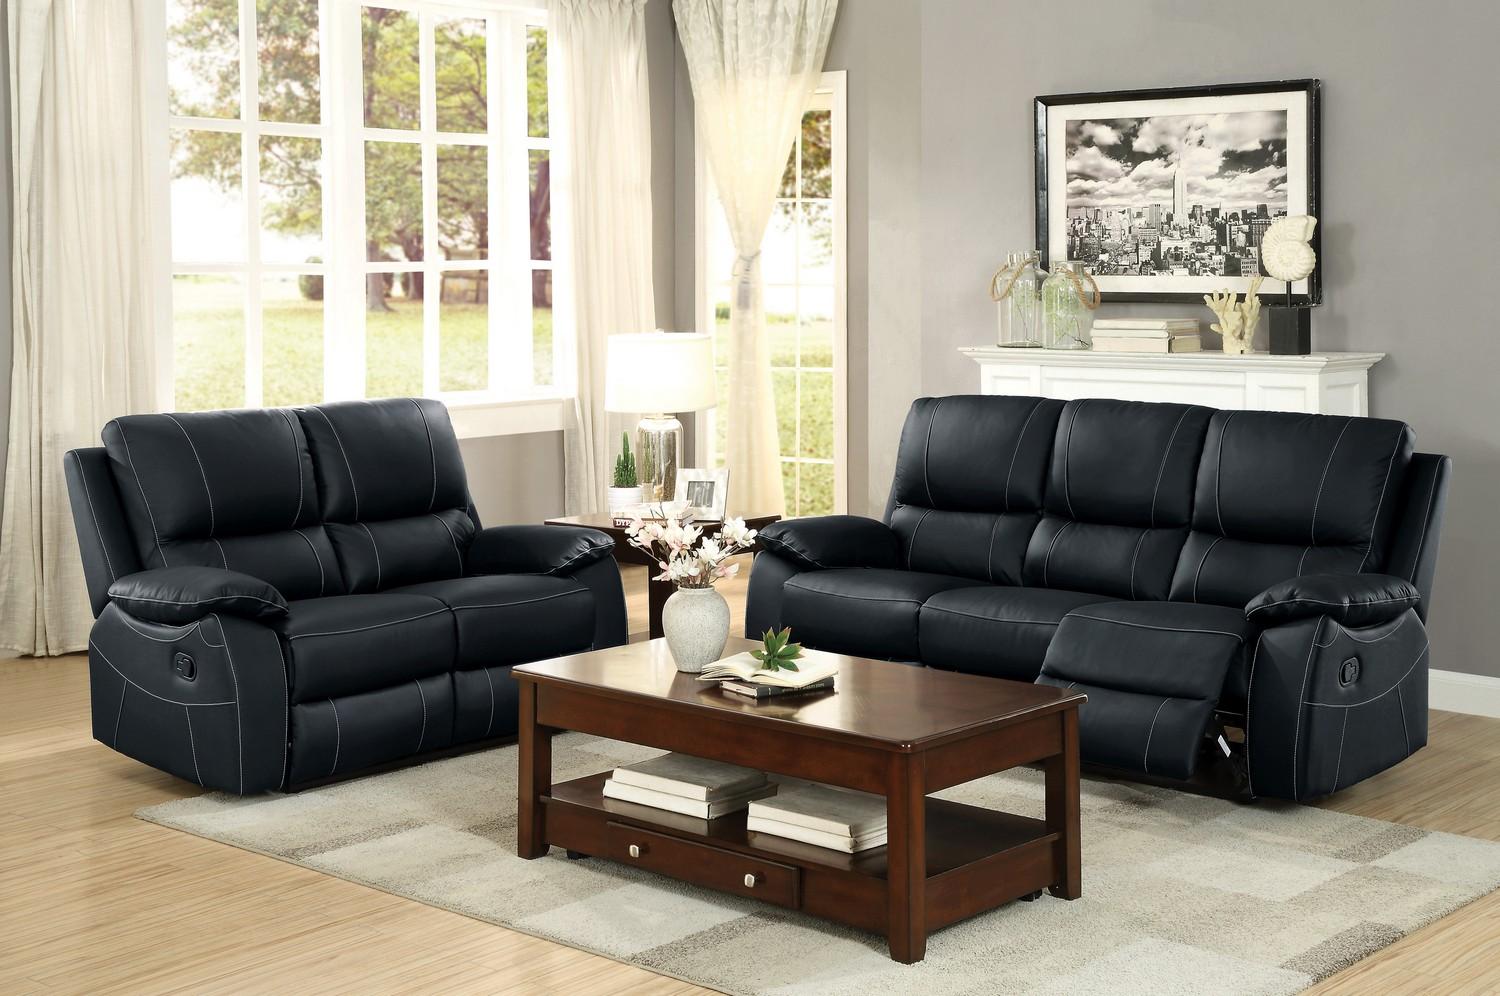 

    
Homelegance 8325BLK Greeley Top Grain Leather Double Reclining Sofa Set 2Pcs
